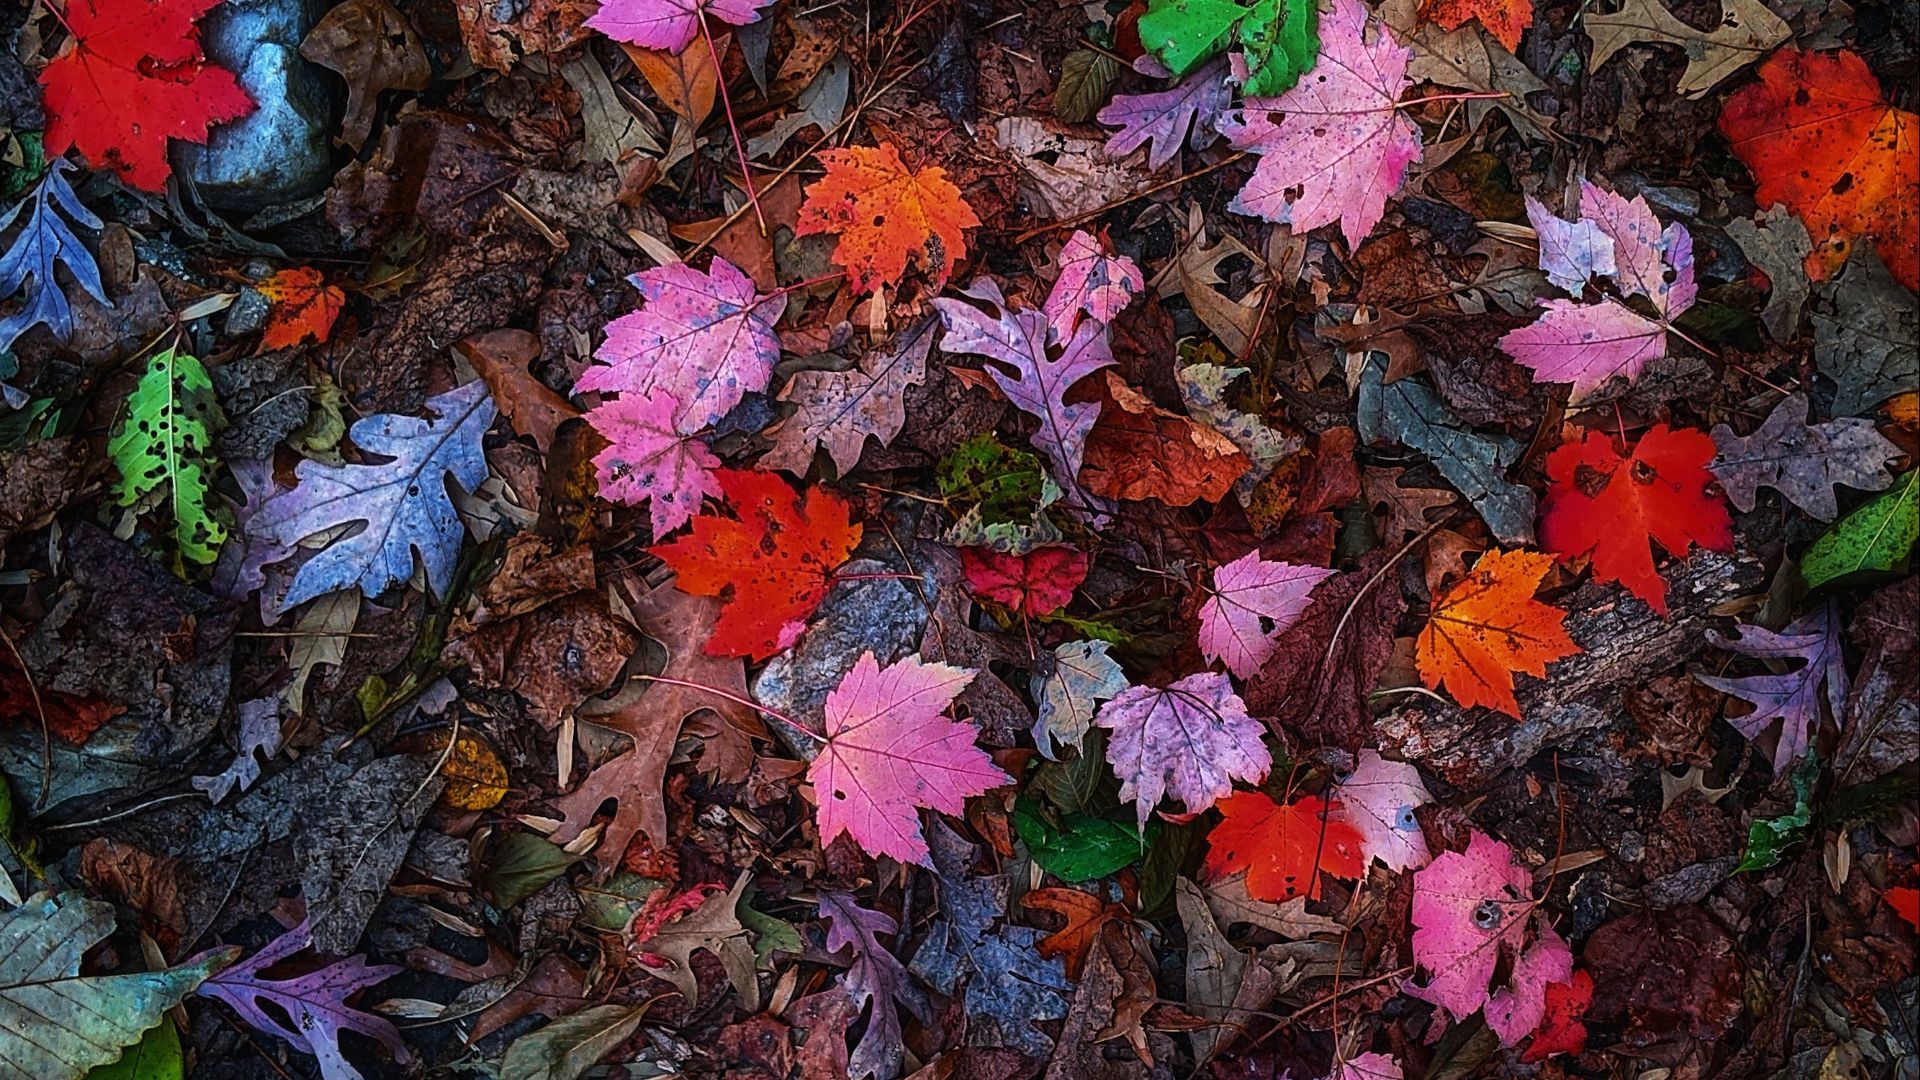 Download wallpaper 1920x1080 leaves, colorful, autumn full hd, hdtv, fhd, 1080p HD background